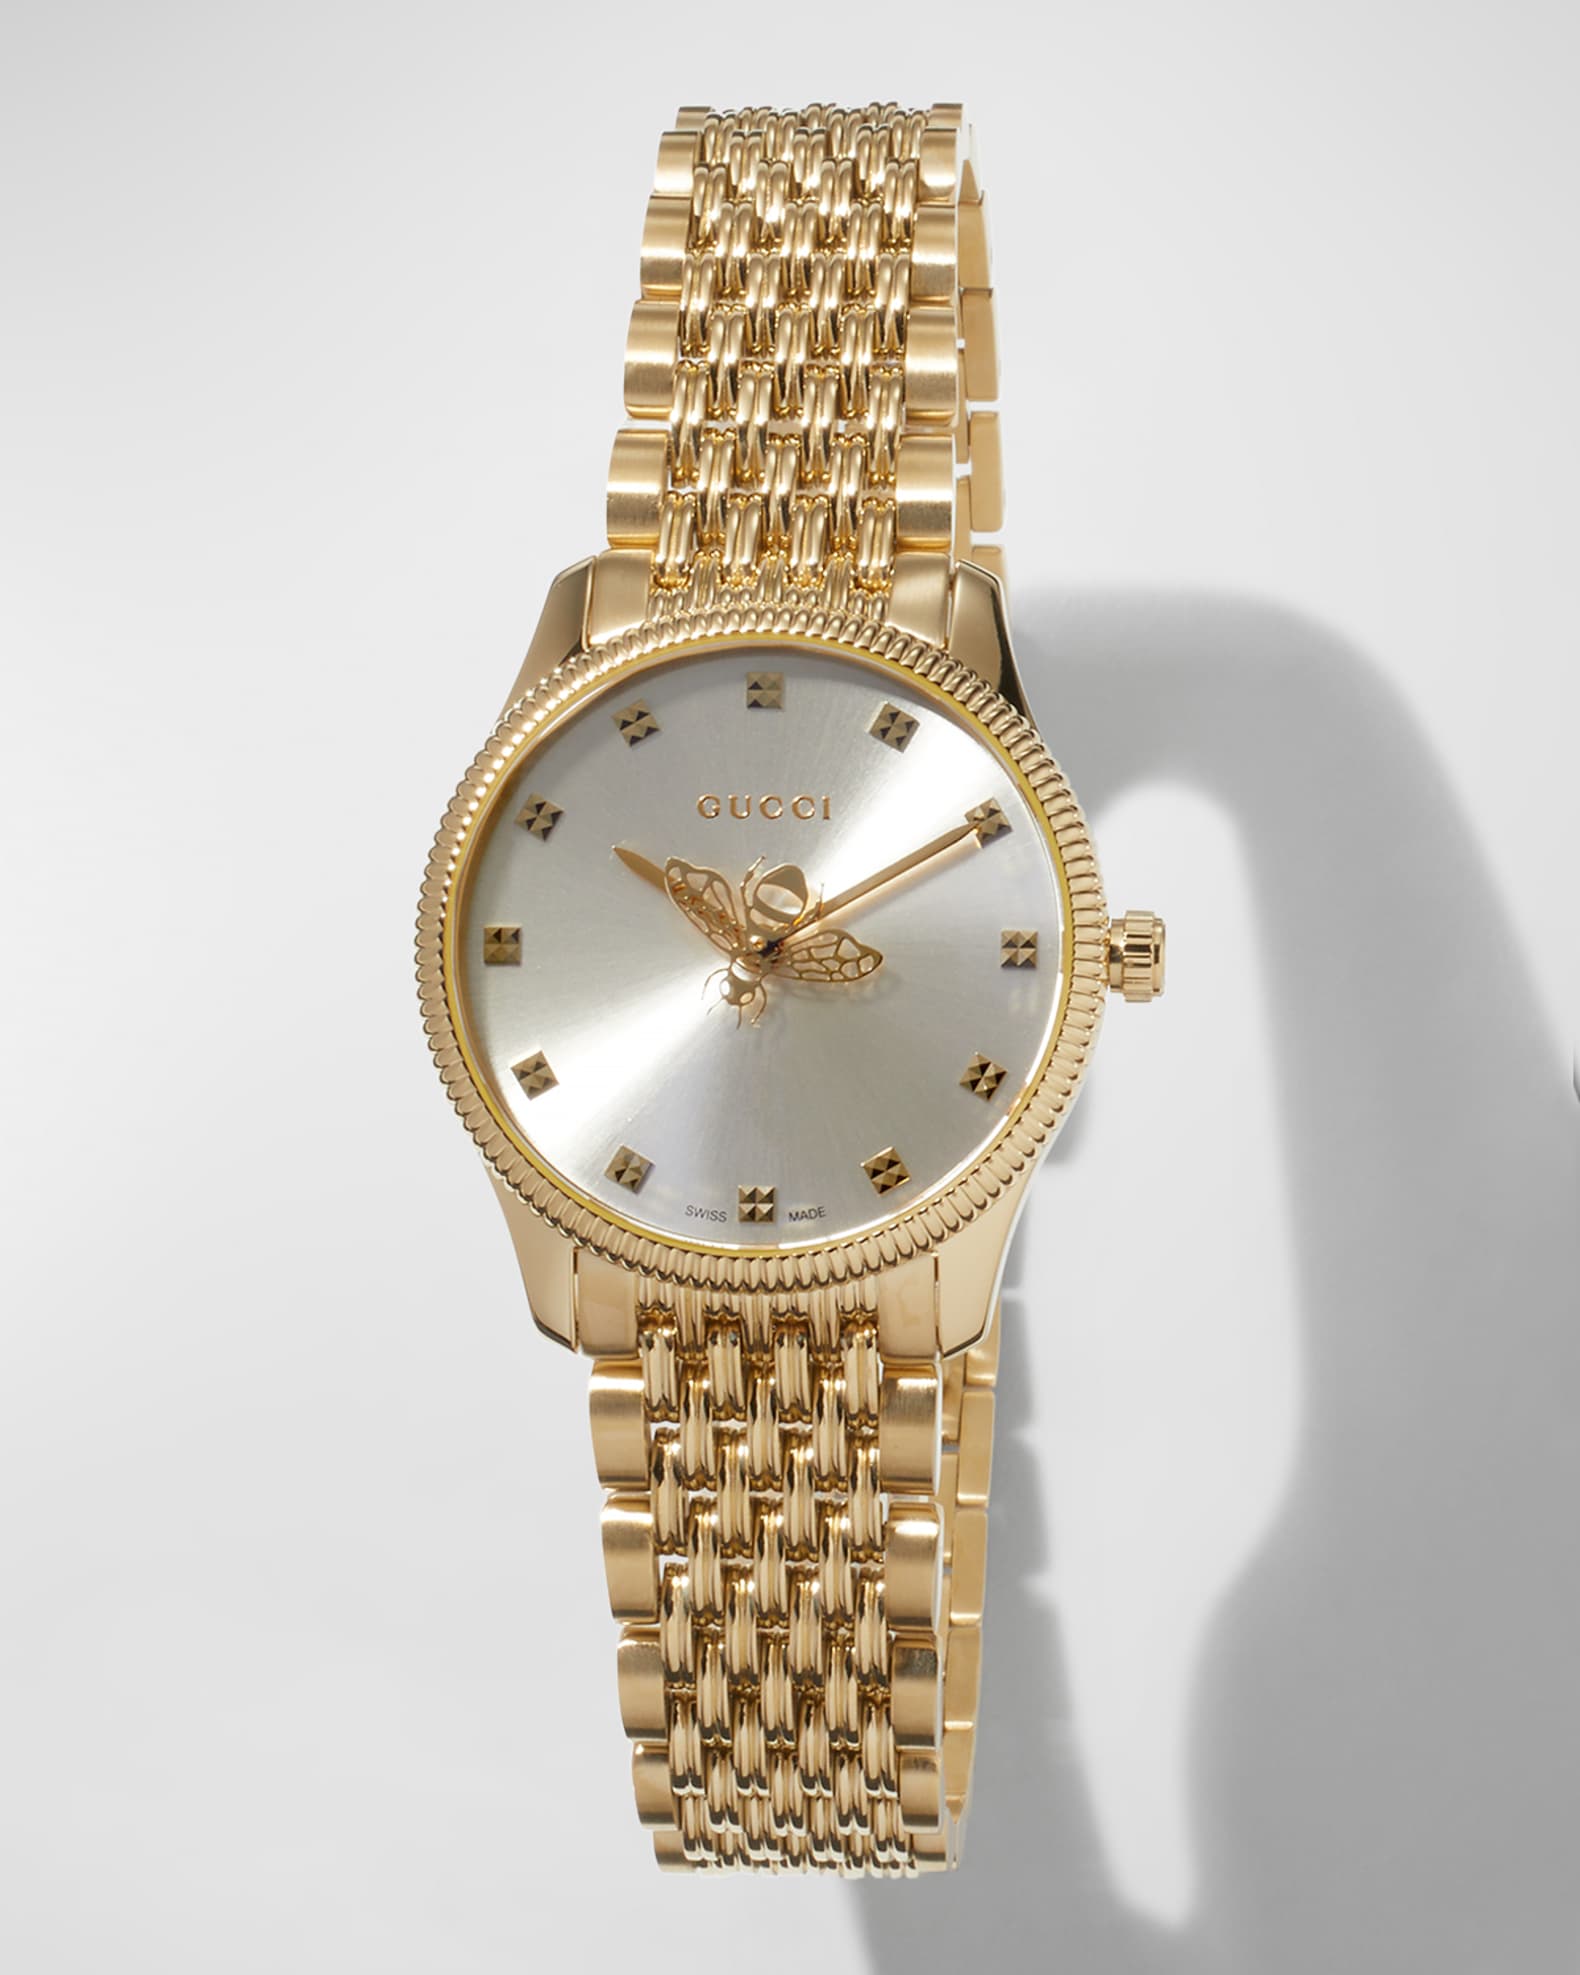 Gucci 29mm G-Timeless Bee Watch with Bracelet Strap, Gold | Neiman